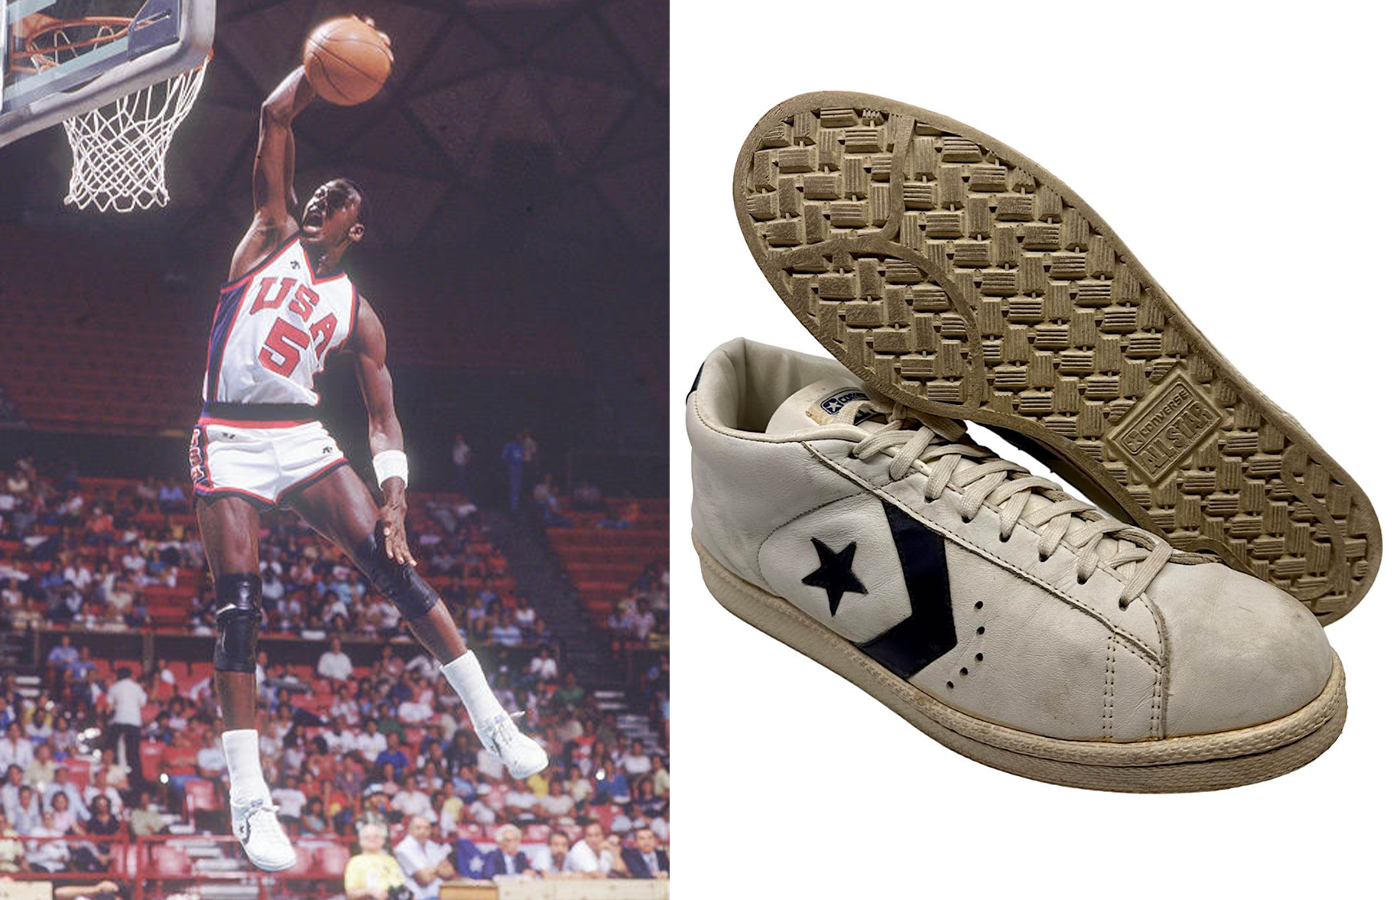 Michael Jordan's Converse All Stars from the 1984 Olympic Trials